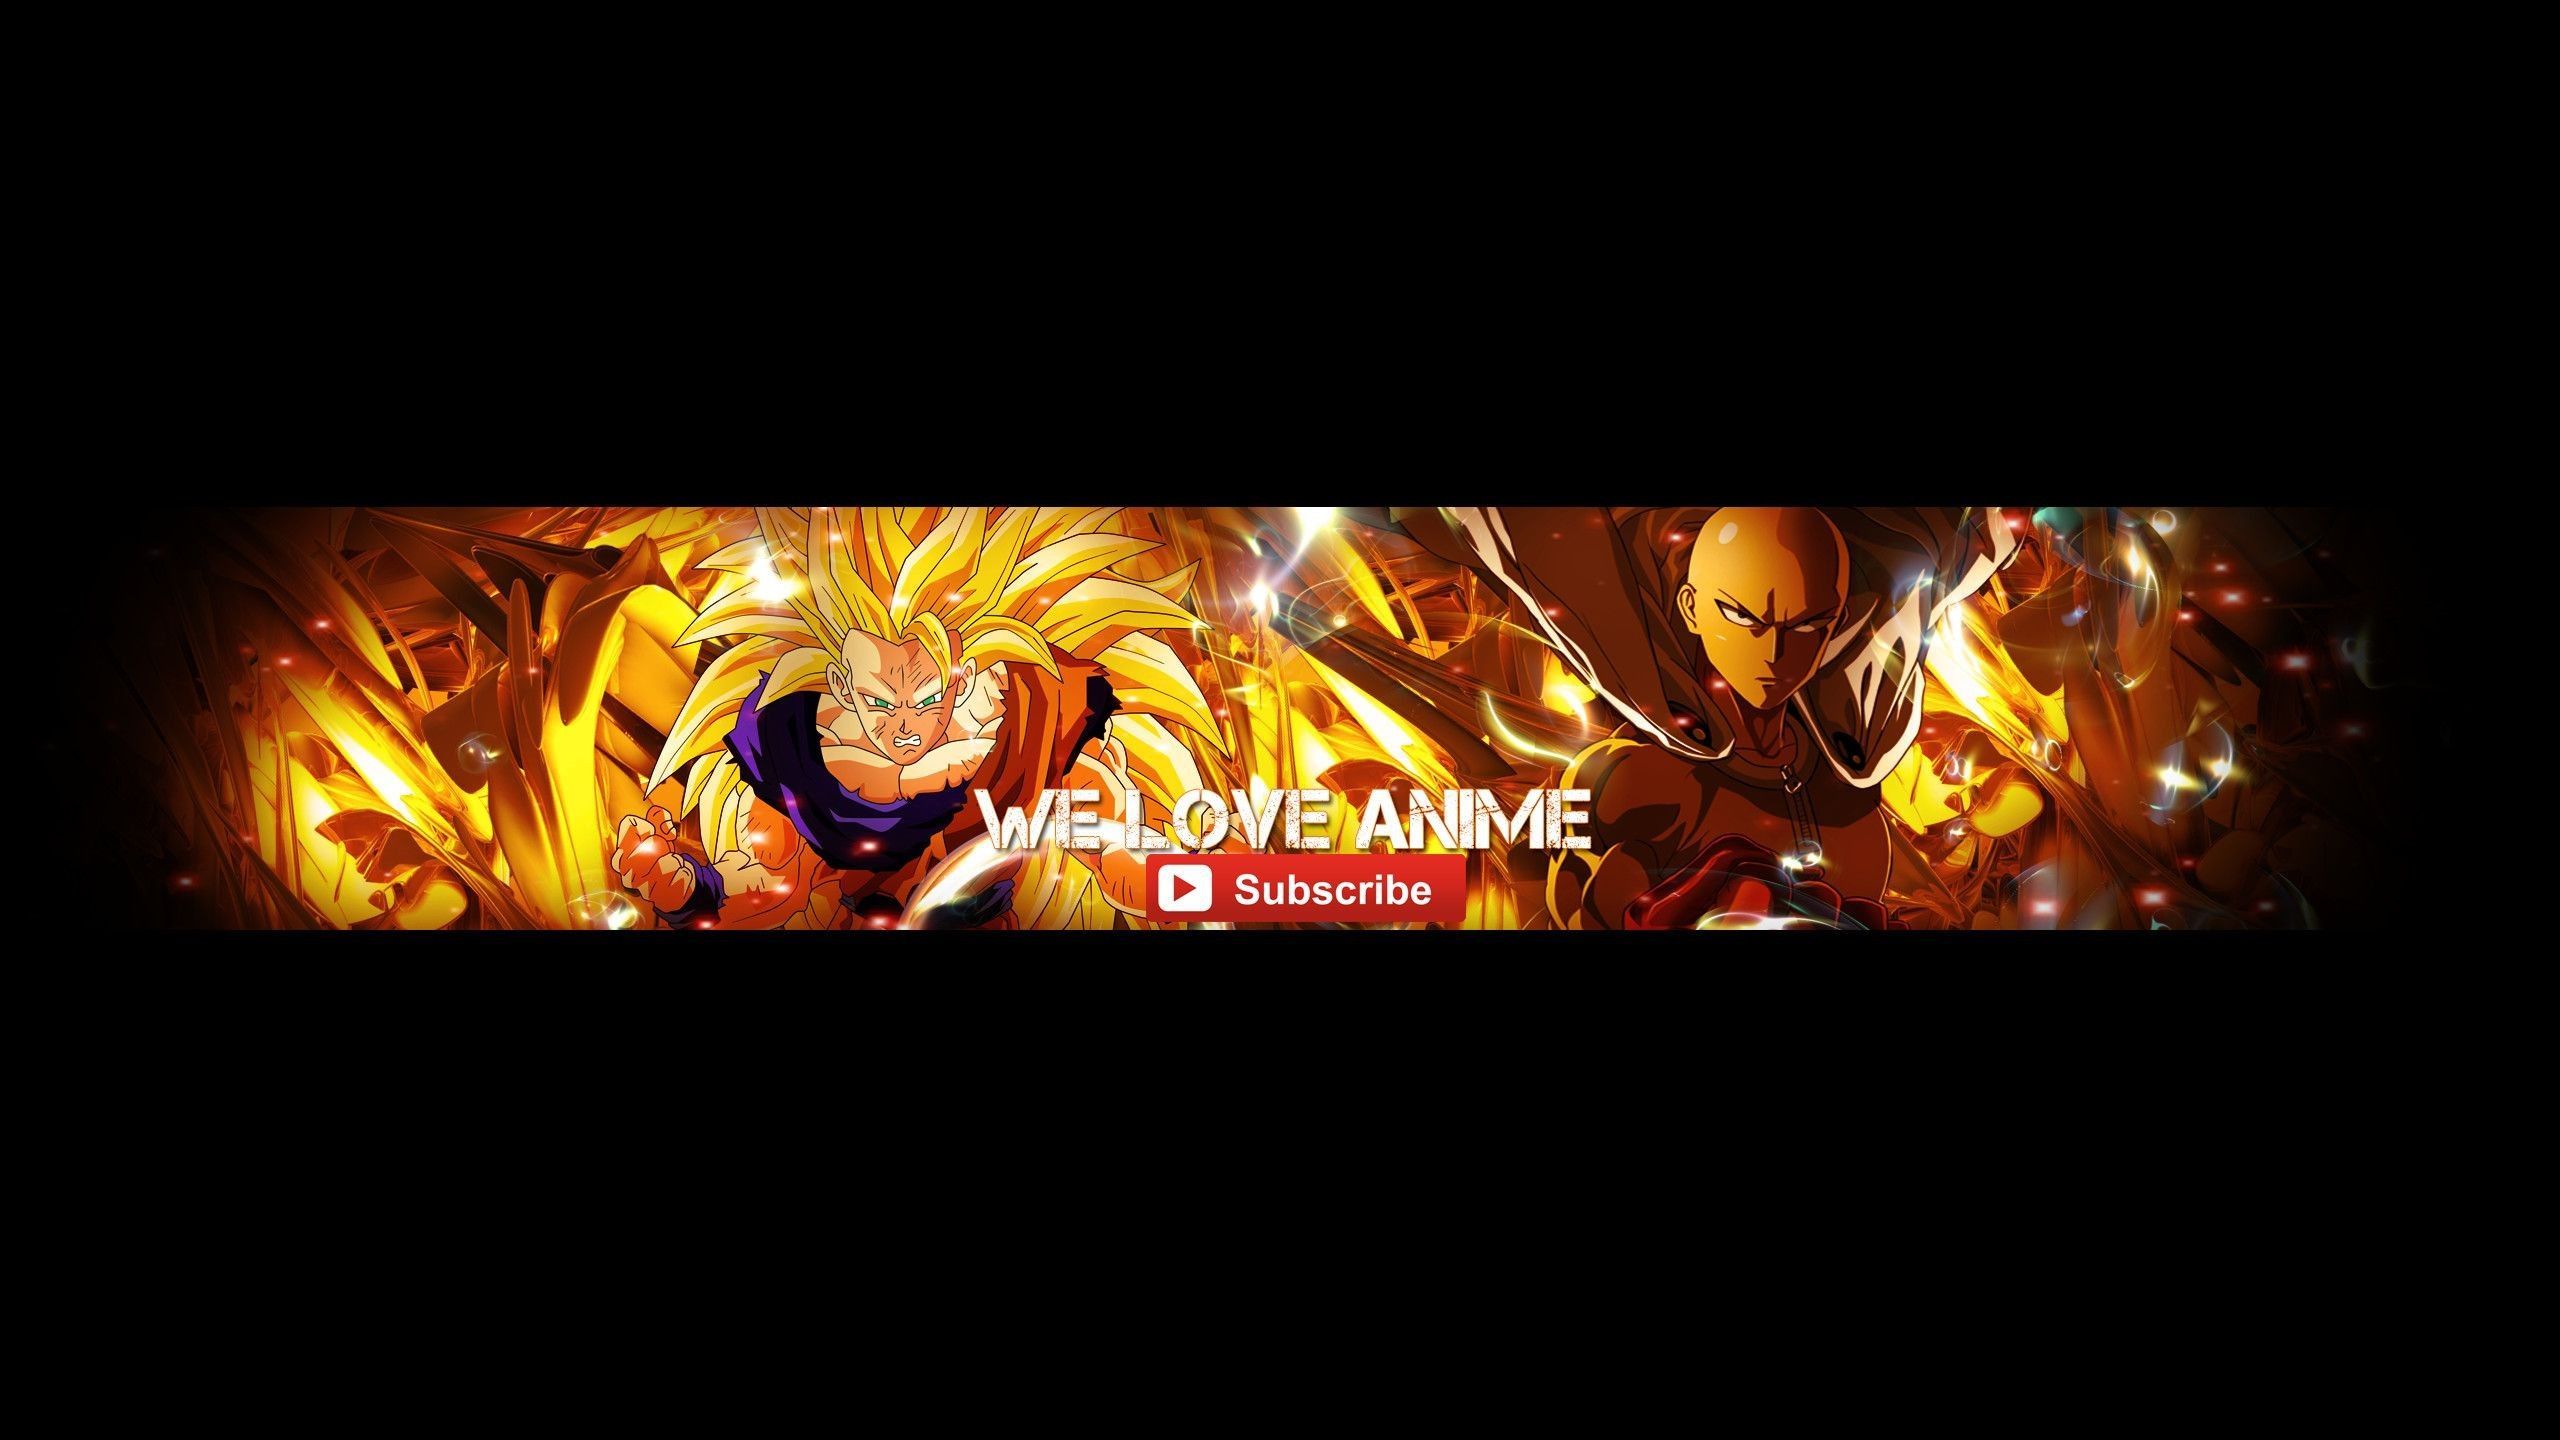 Youtube Banner Anime Is Youtube Banner Anime The Most Trending Thing Now?. Youtube channel art, Youtube banners, Channel art